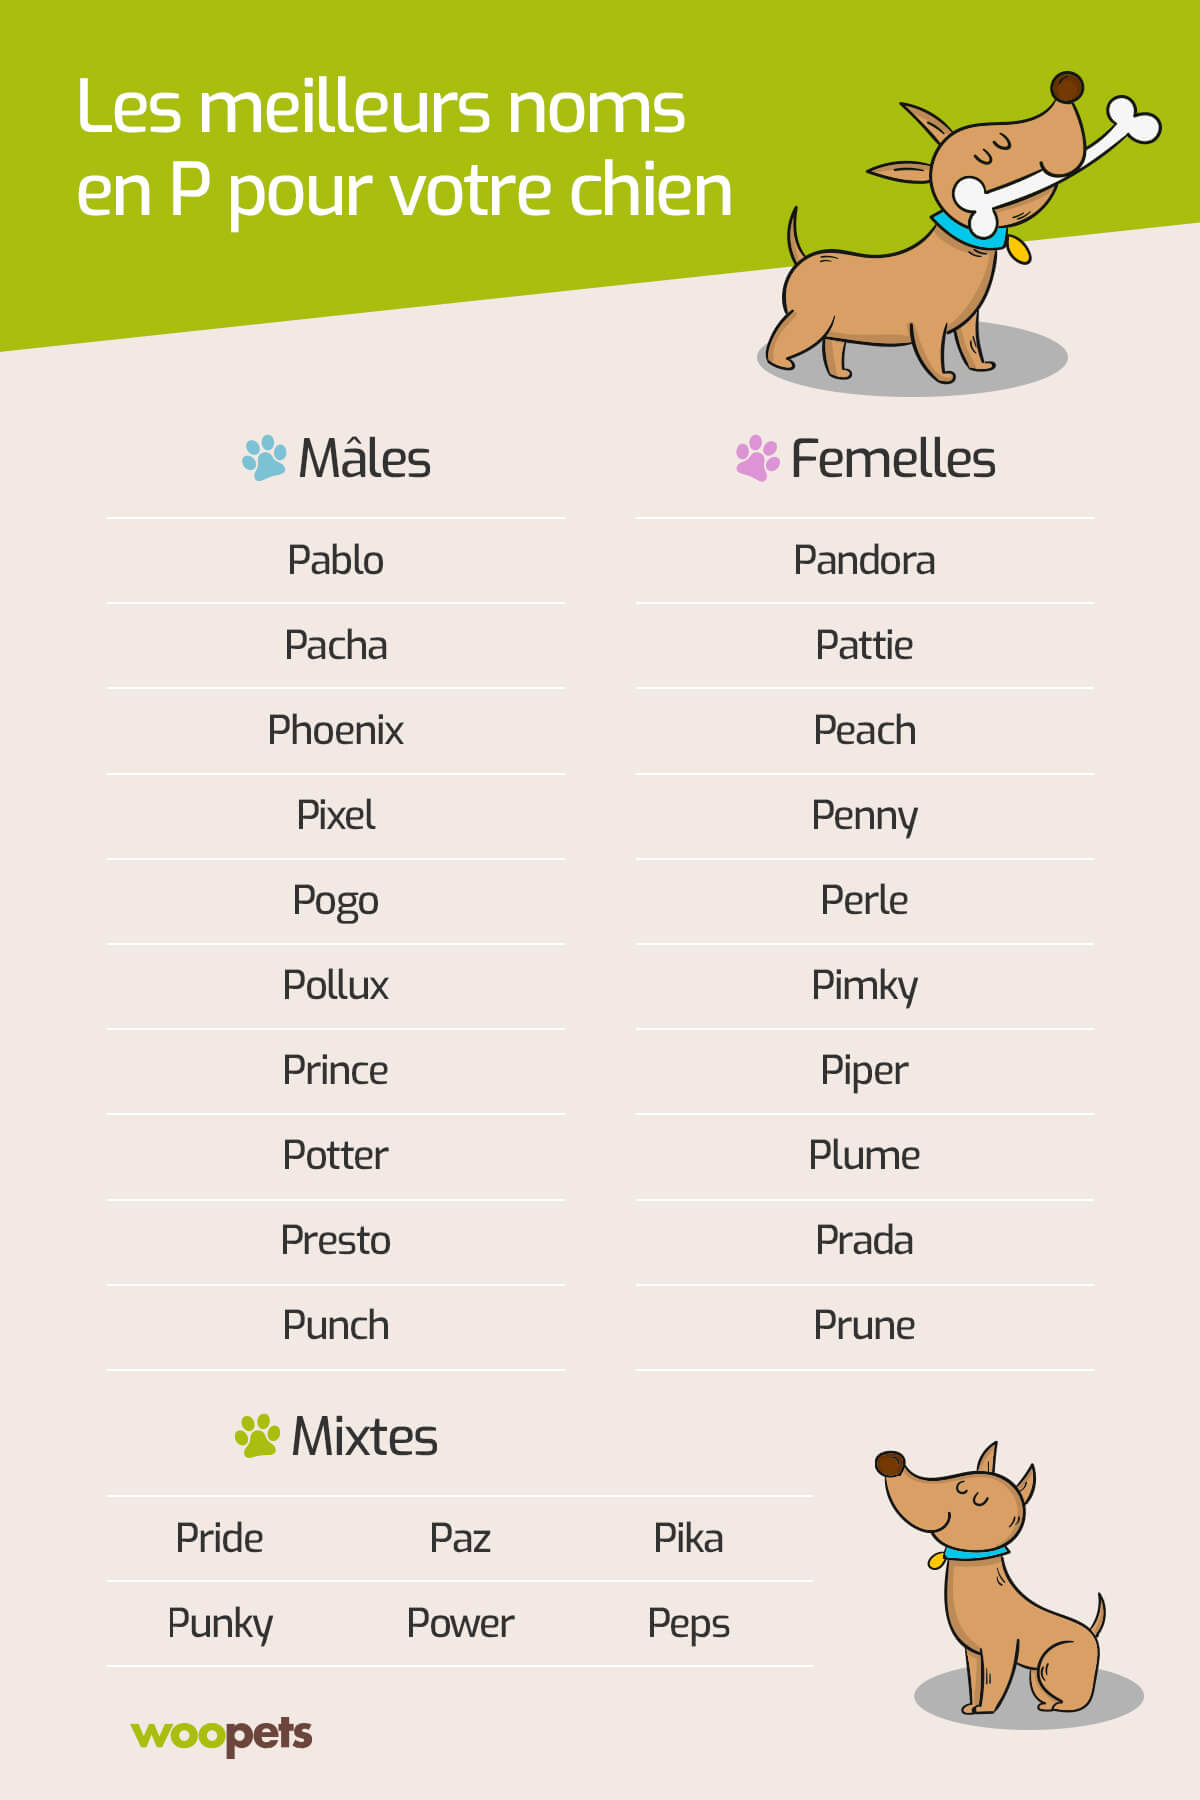 The best P names for your dog in 2019